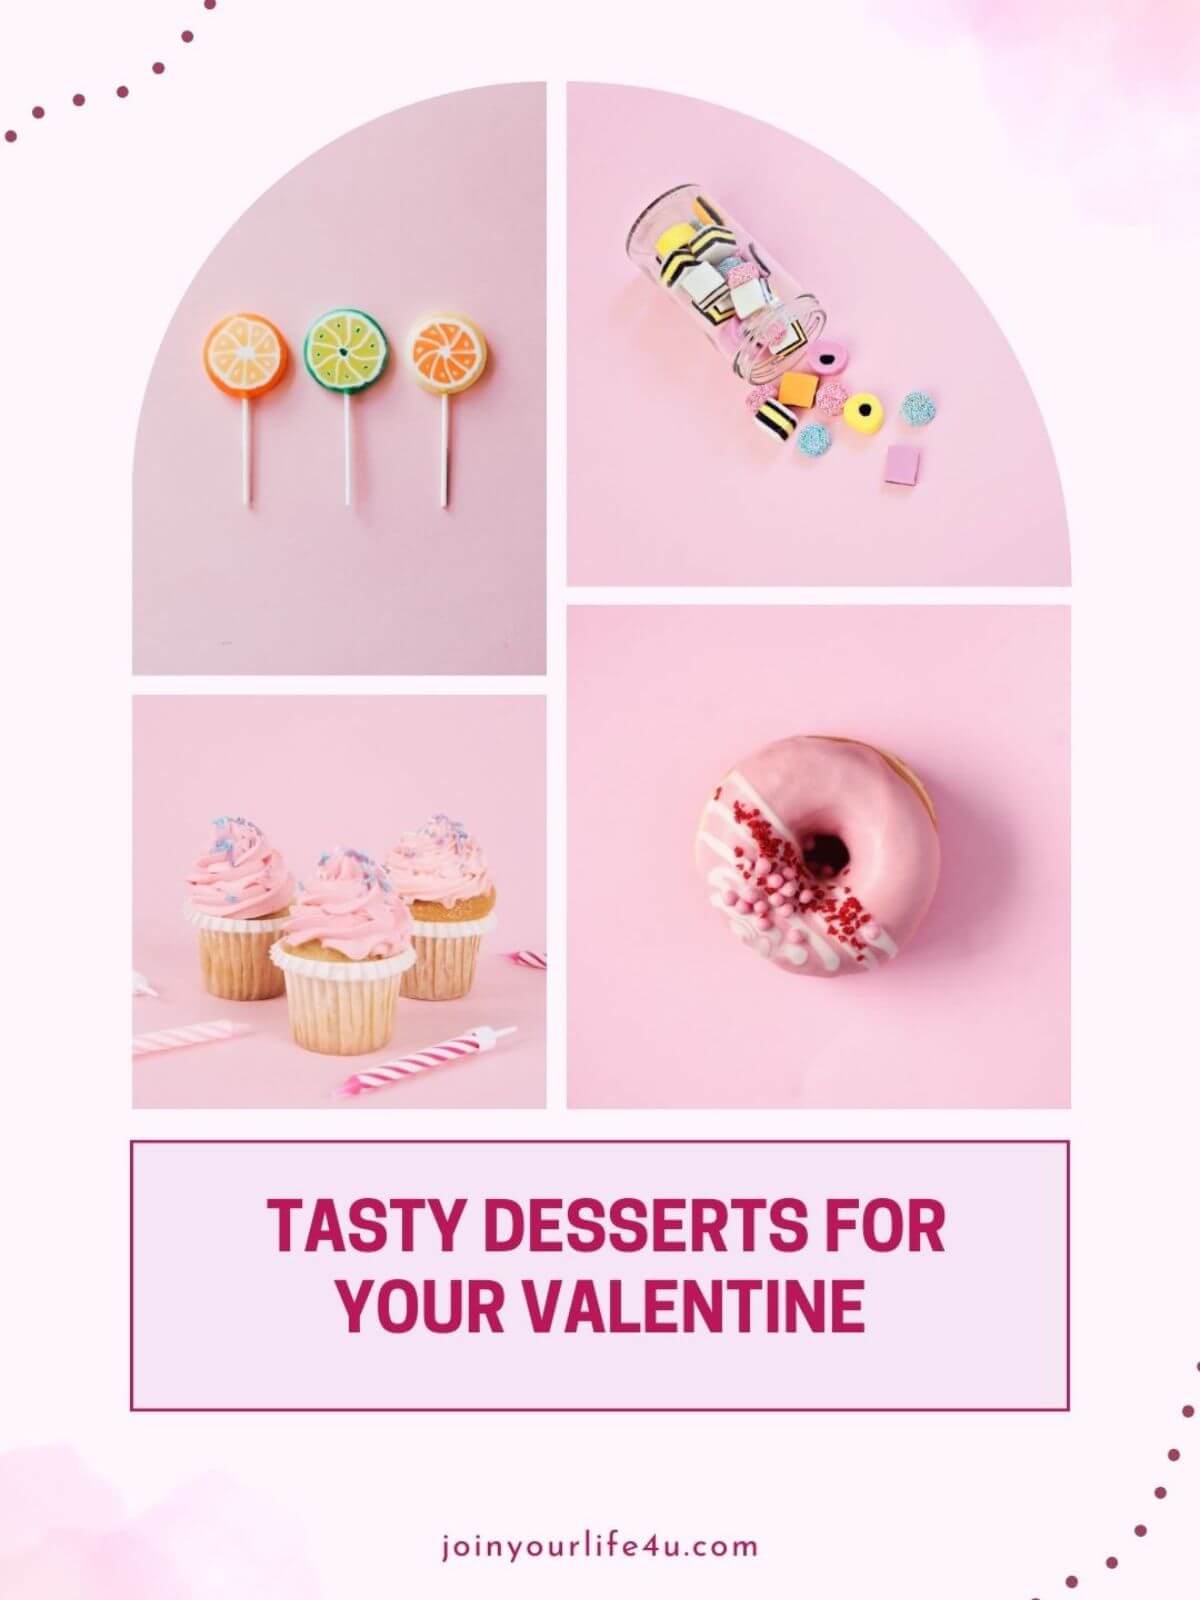 A picture with a pink background shows lollipops, candies, cupcakes, and doughnuts, all in light pink colors. The title of the photo, written in pink, says: Tasty desserts for your valentine.